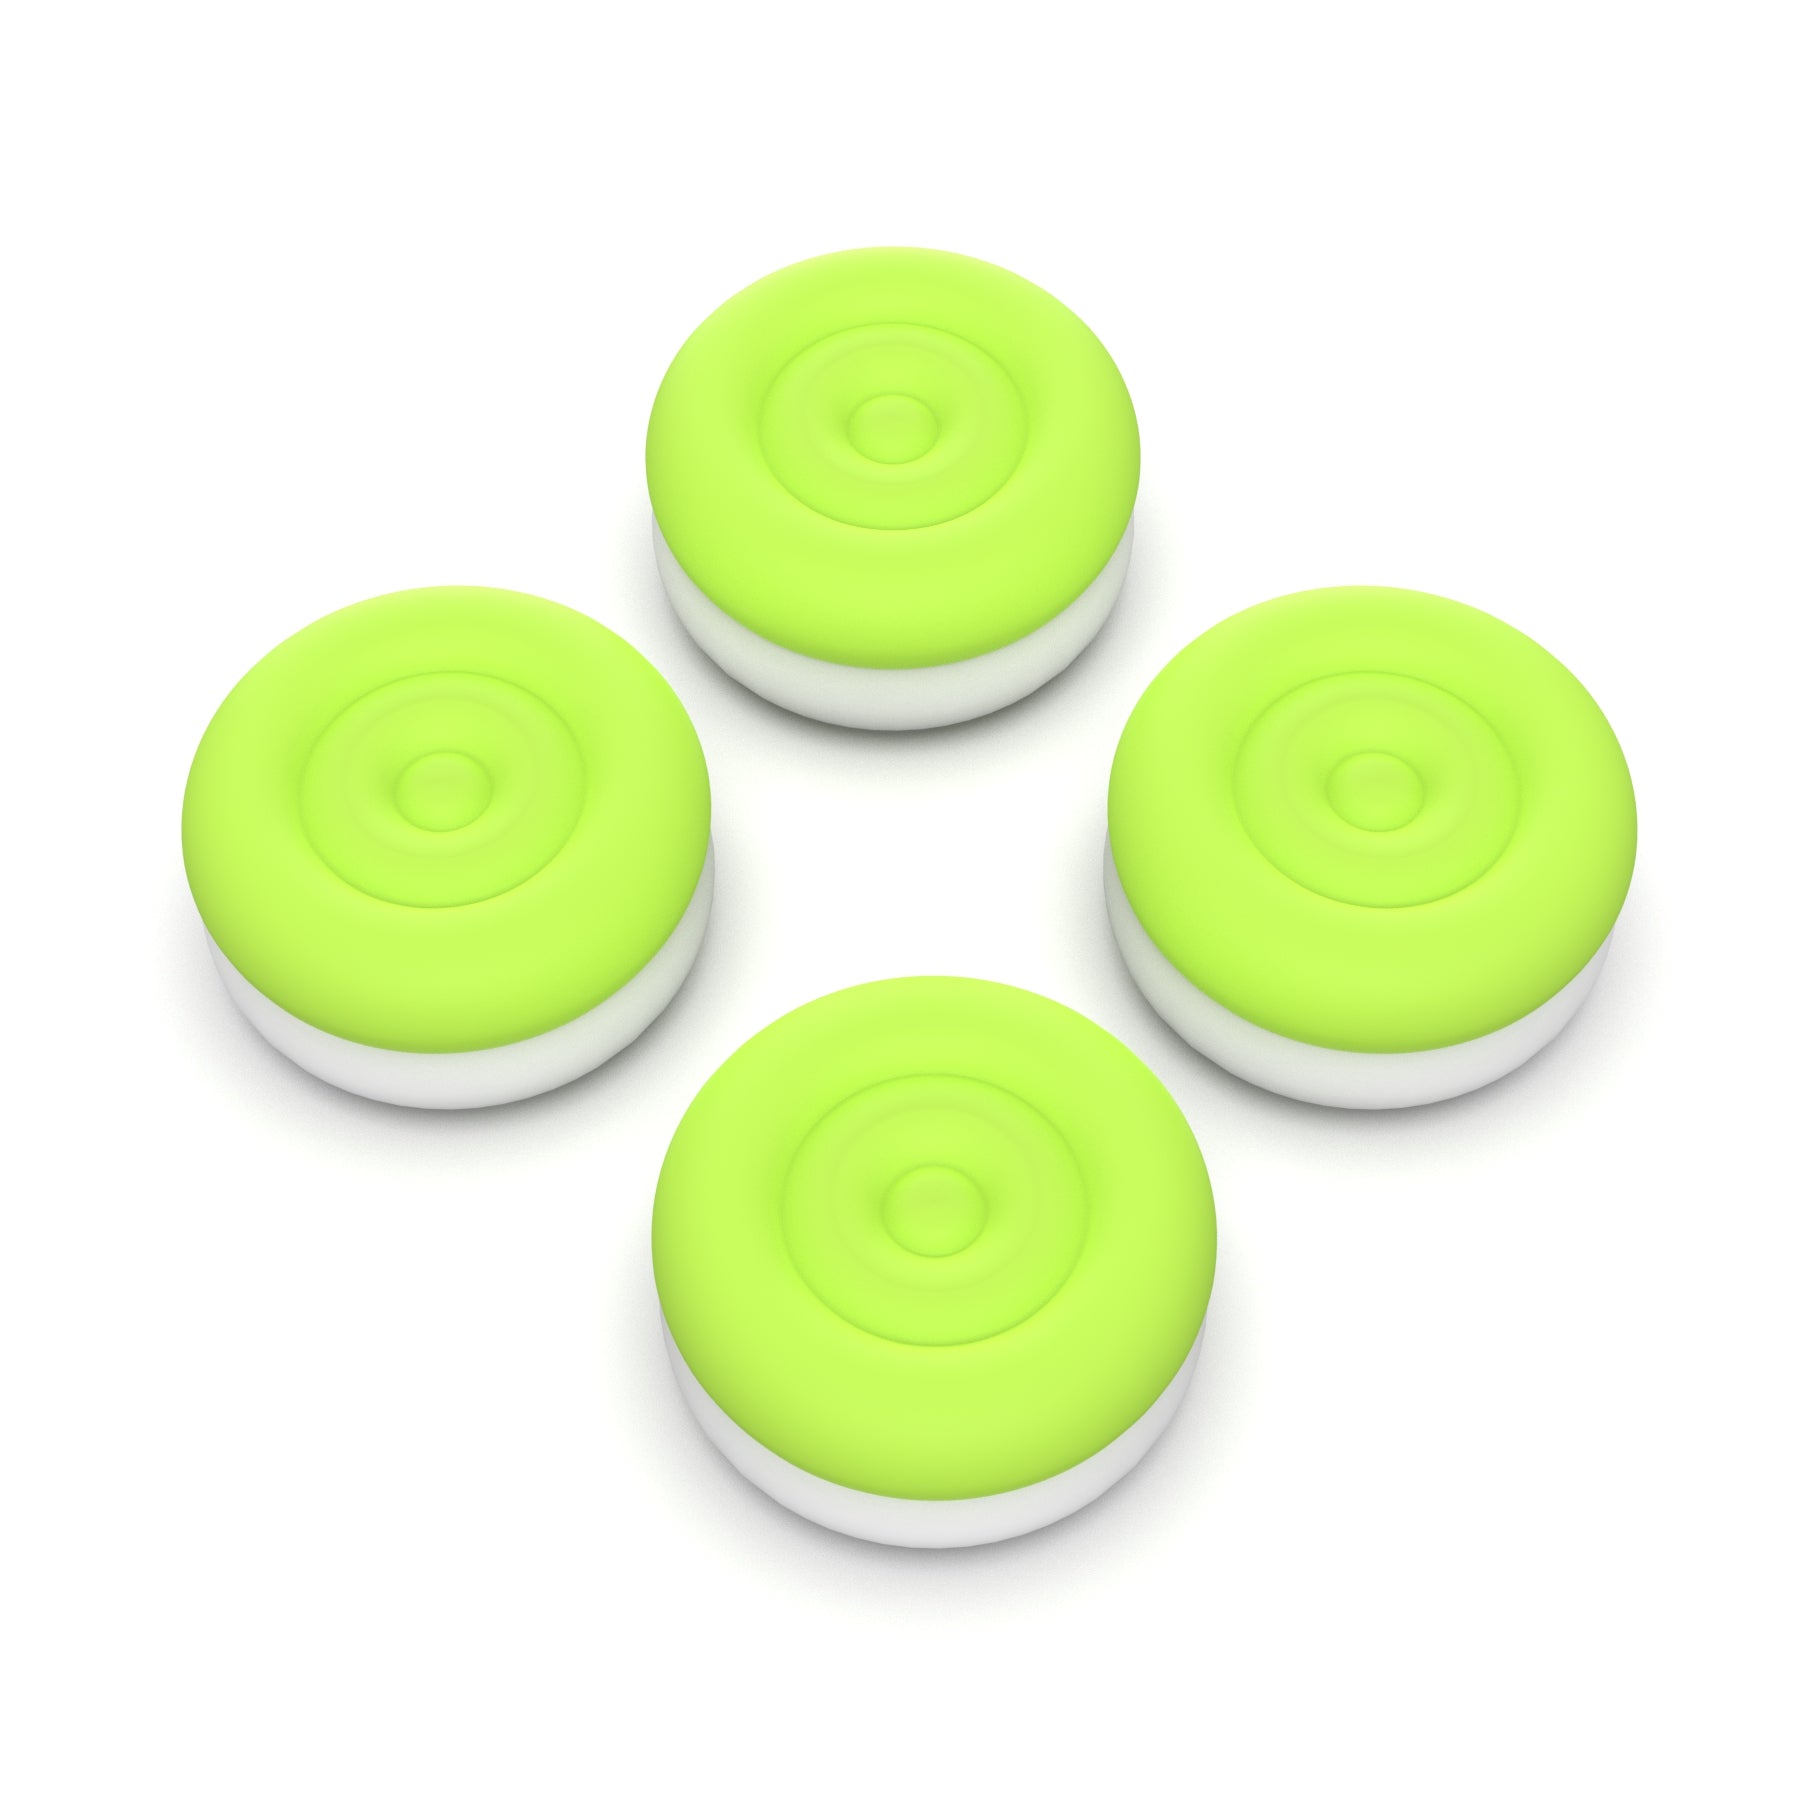 PlayVital Thumbs Cushion Caps Thumb Grips for ps5, for ps4, Thumbstick Grip Cover for Xbox Series X/S, Thumb Grip Caps for Xbox One, Elite Series 2, for Switch Pro Controller - Bright Green & Robot White - PJM3040 PlayVital